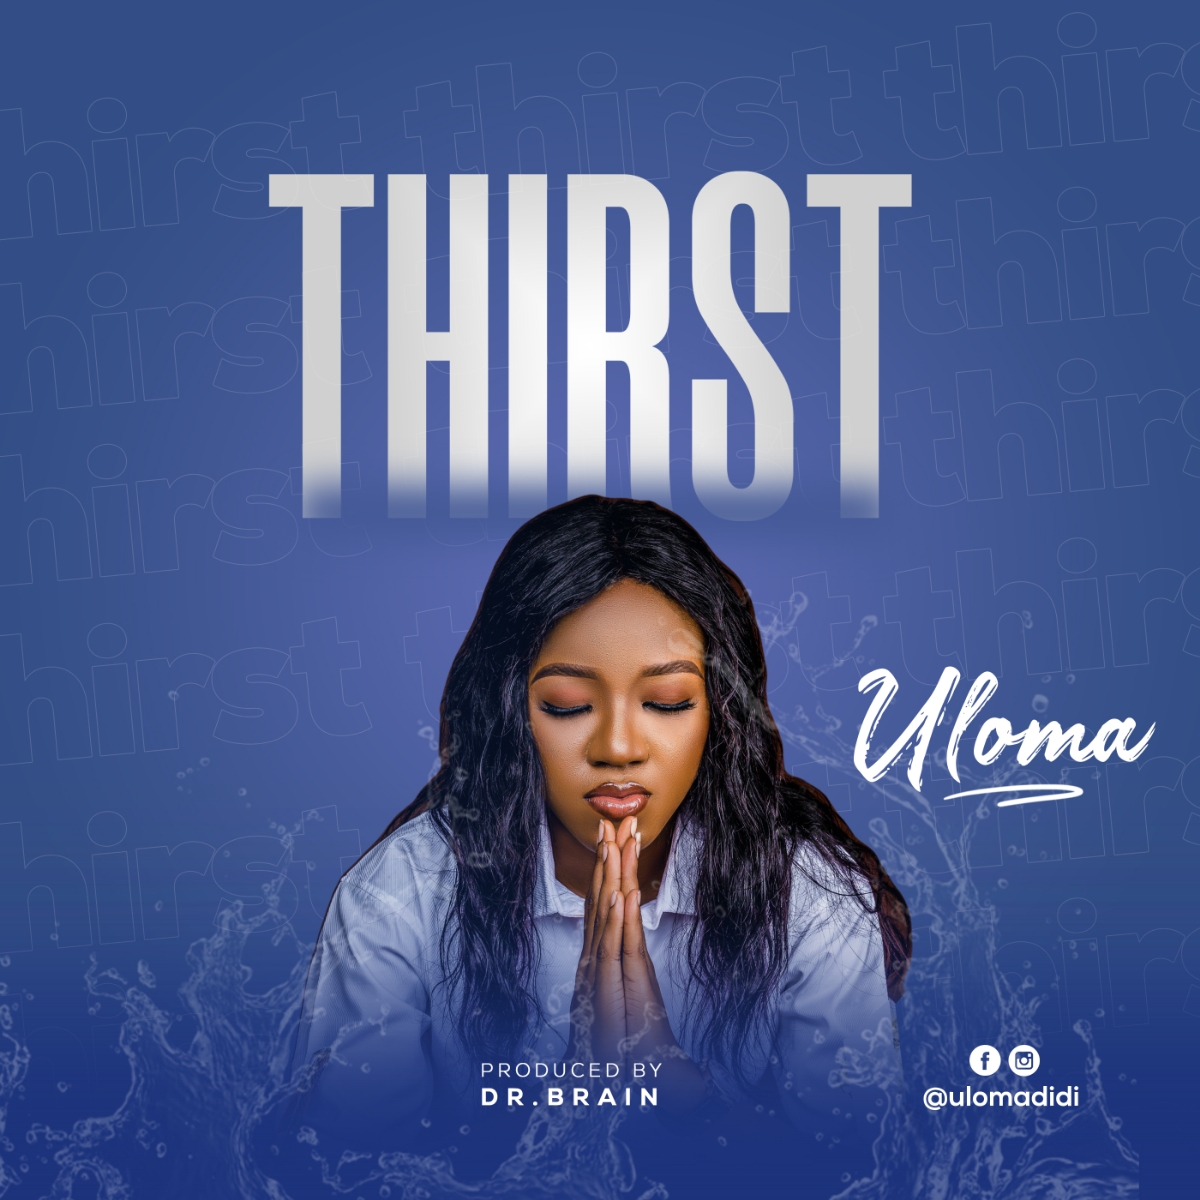 Thirst by Uloma